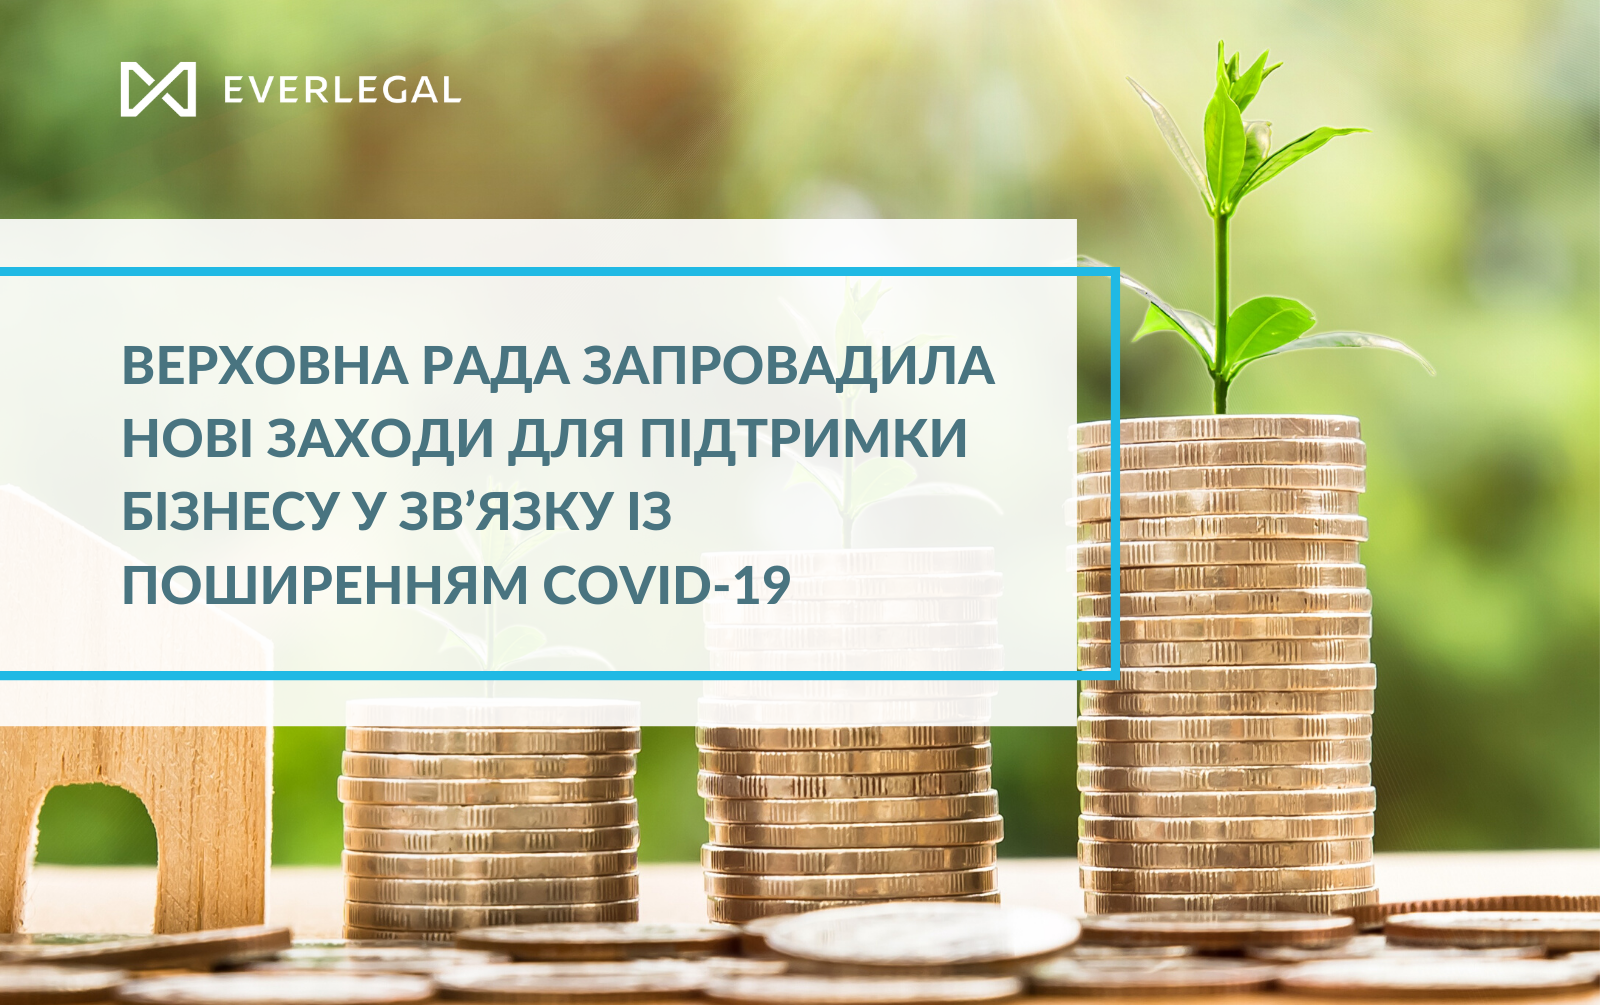 Verkhovna Rada has introduced new measures to support business in connection with the spread of COVID-19